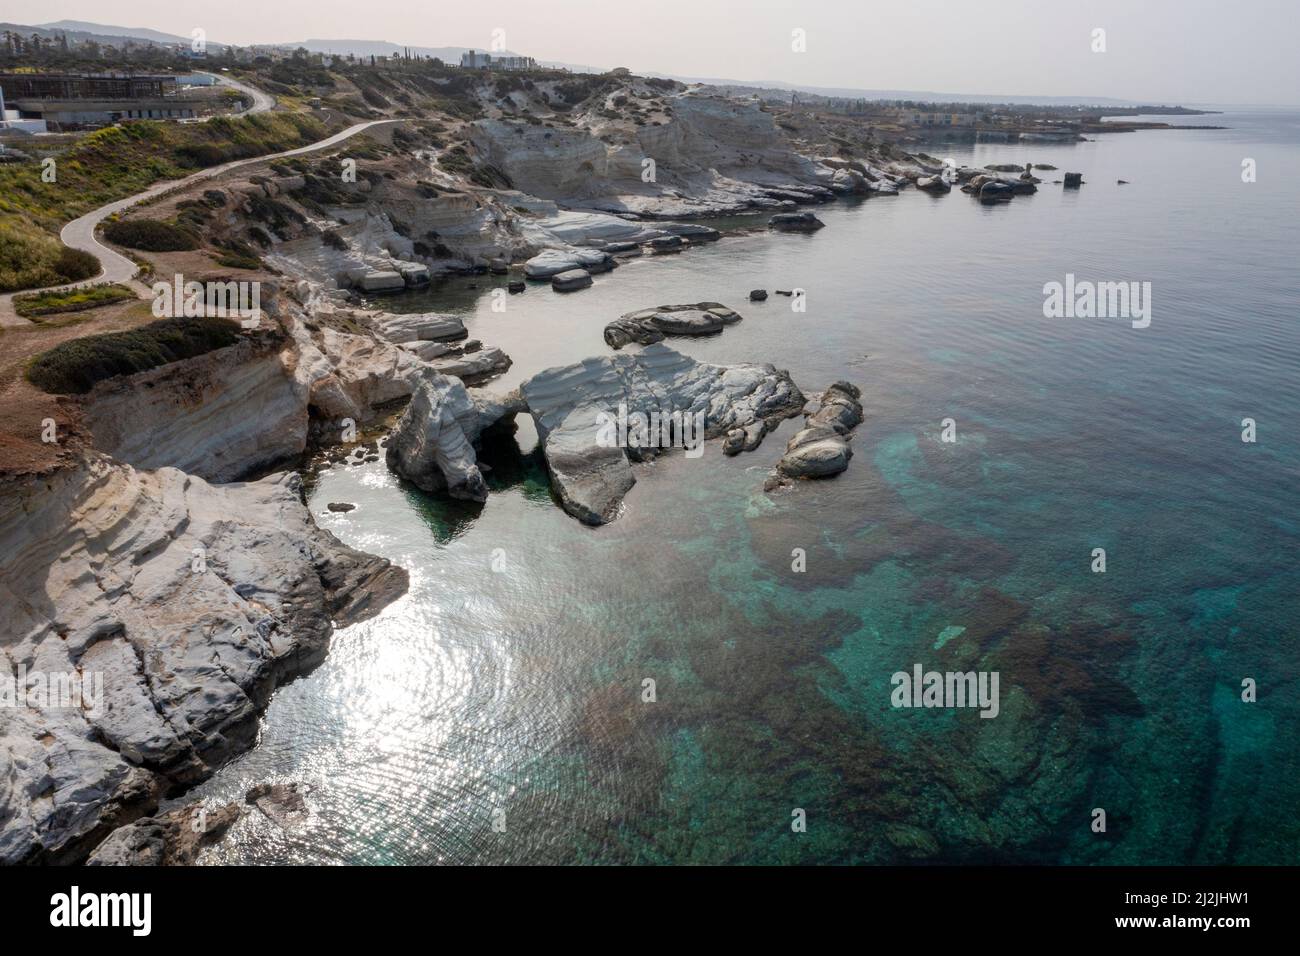 Aerial view of limestone rock formations on the coastline at Sea Caves, Peyia, Paphos, Cyprus. Stock Photo